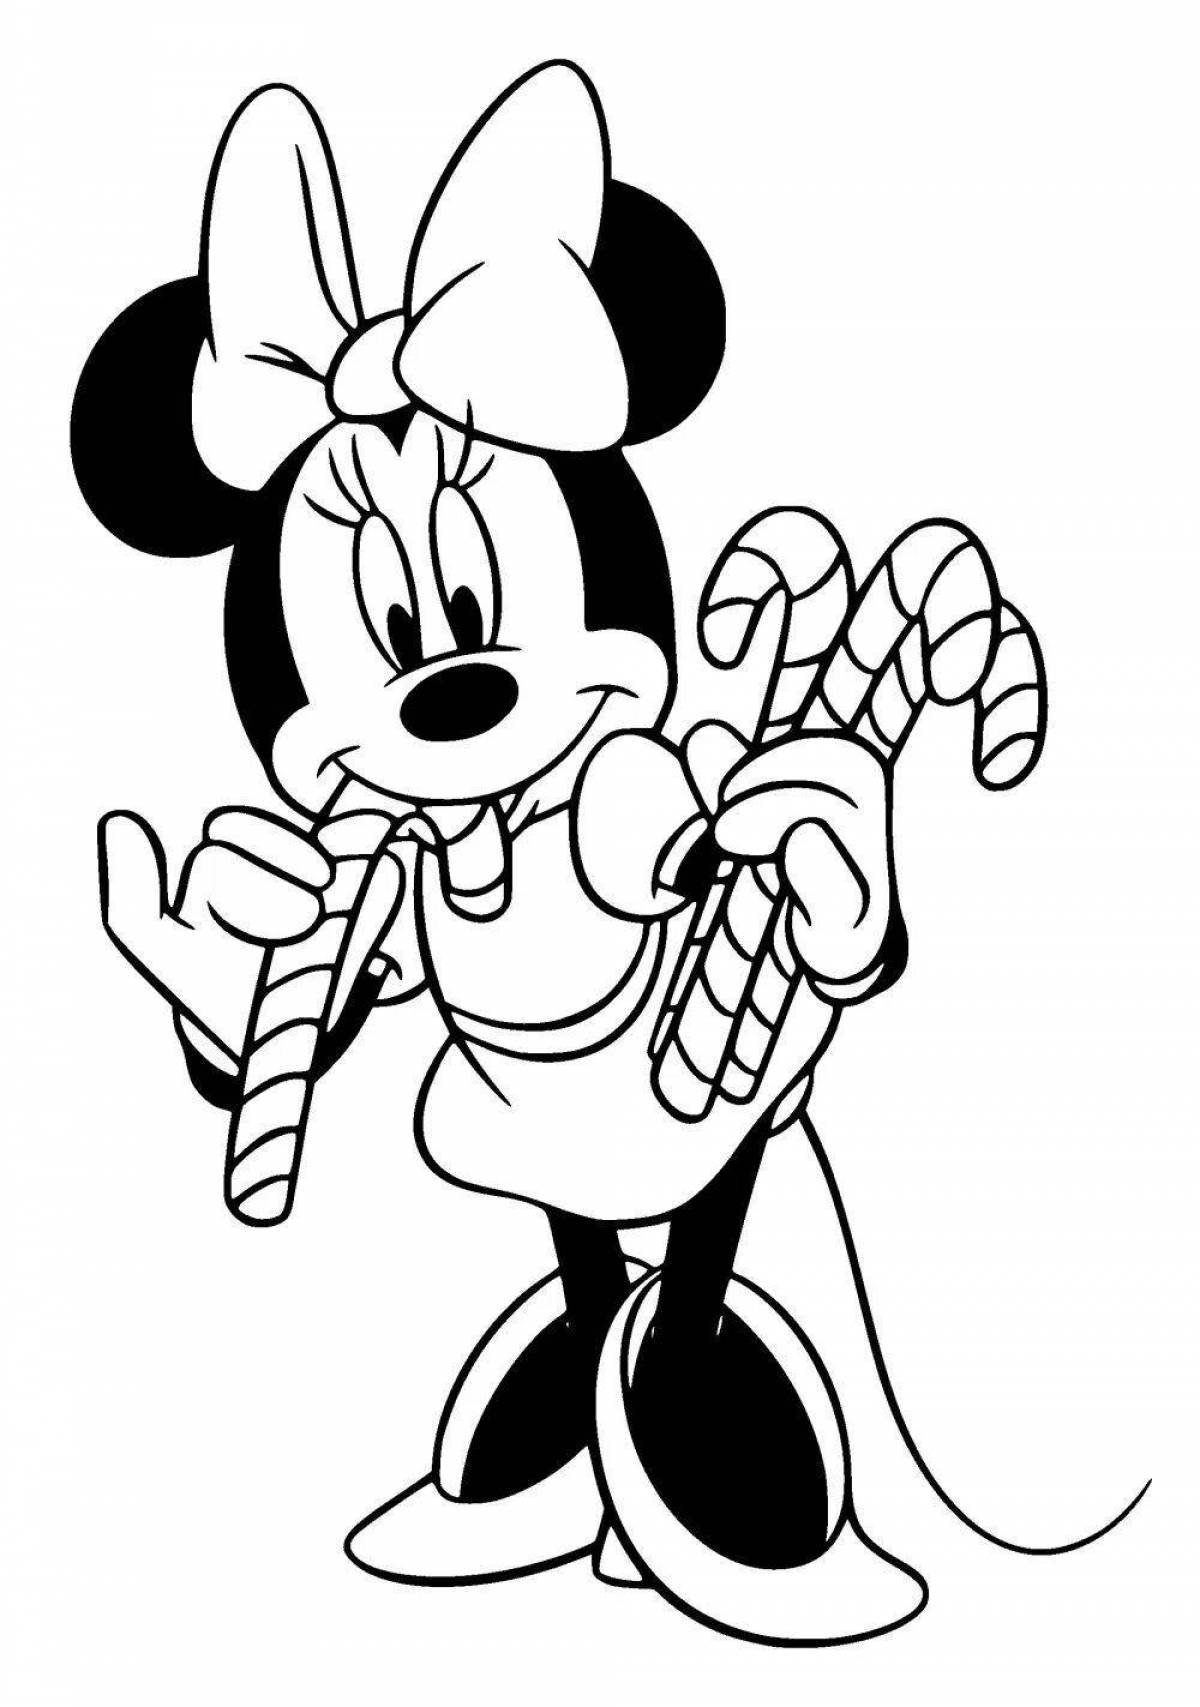 Animated disney character coloring pages